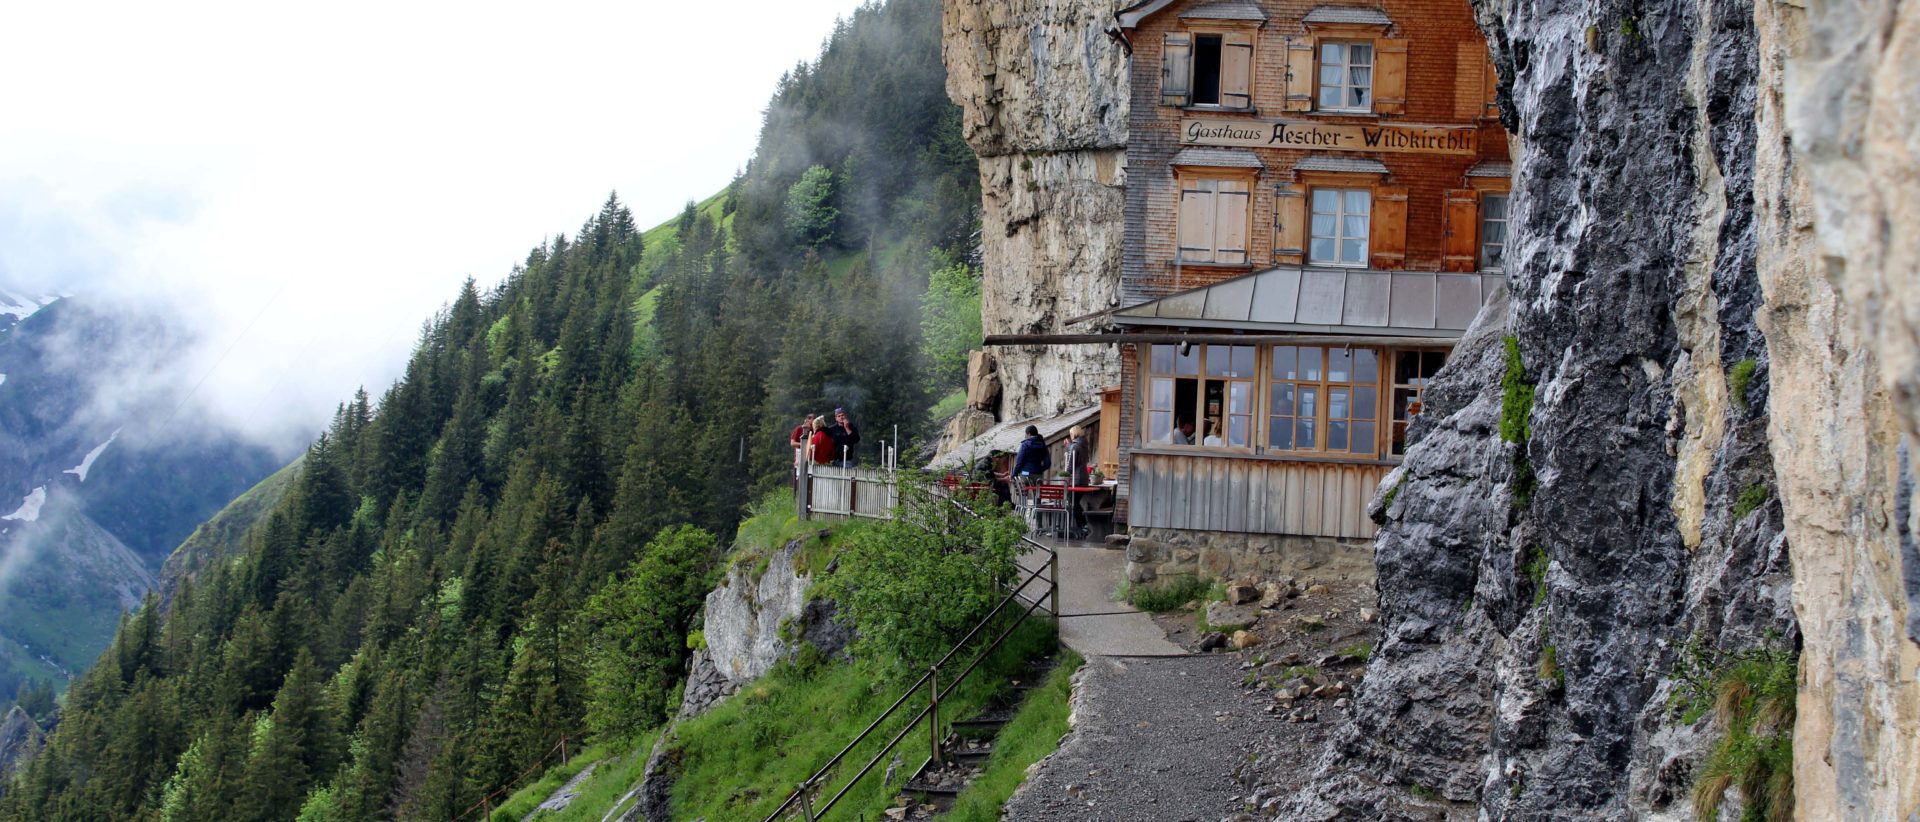 AMAZING HIKE TO ONE OF THE OLDEST     MOUNTAIN INNS-AESCHER GUESTHOUSE & RESTAURANT IN SWITZERLAND